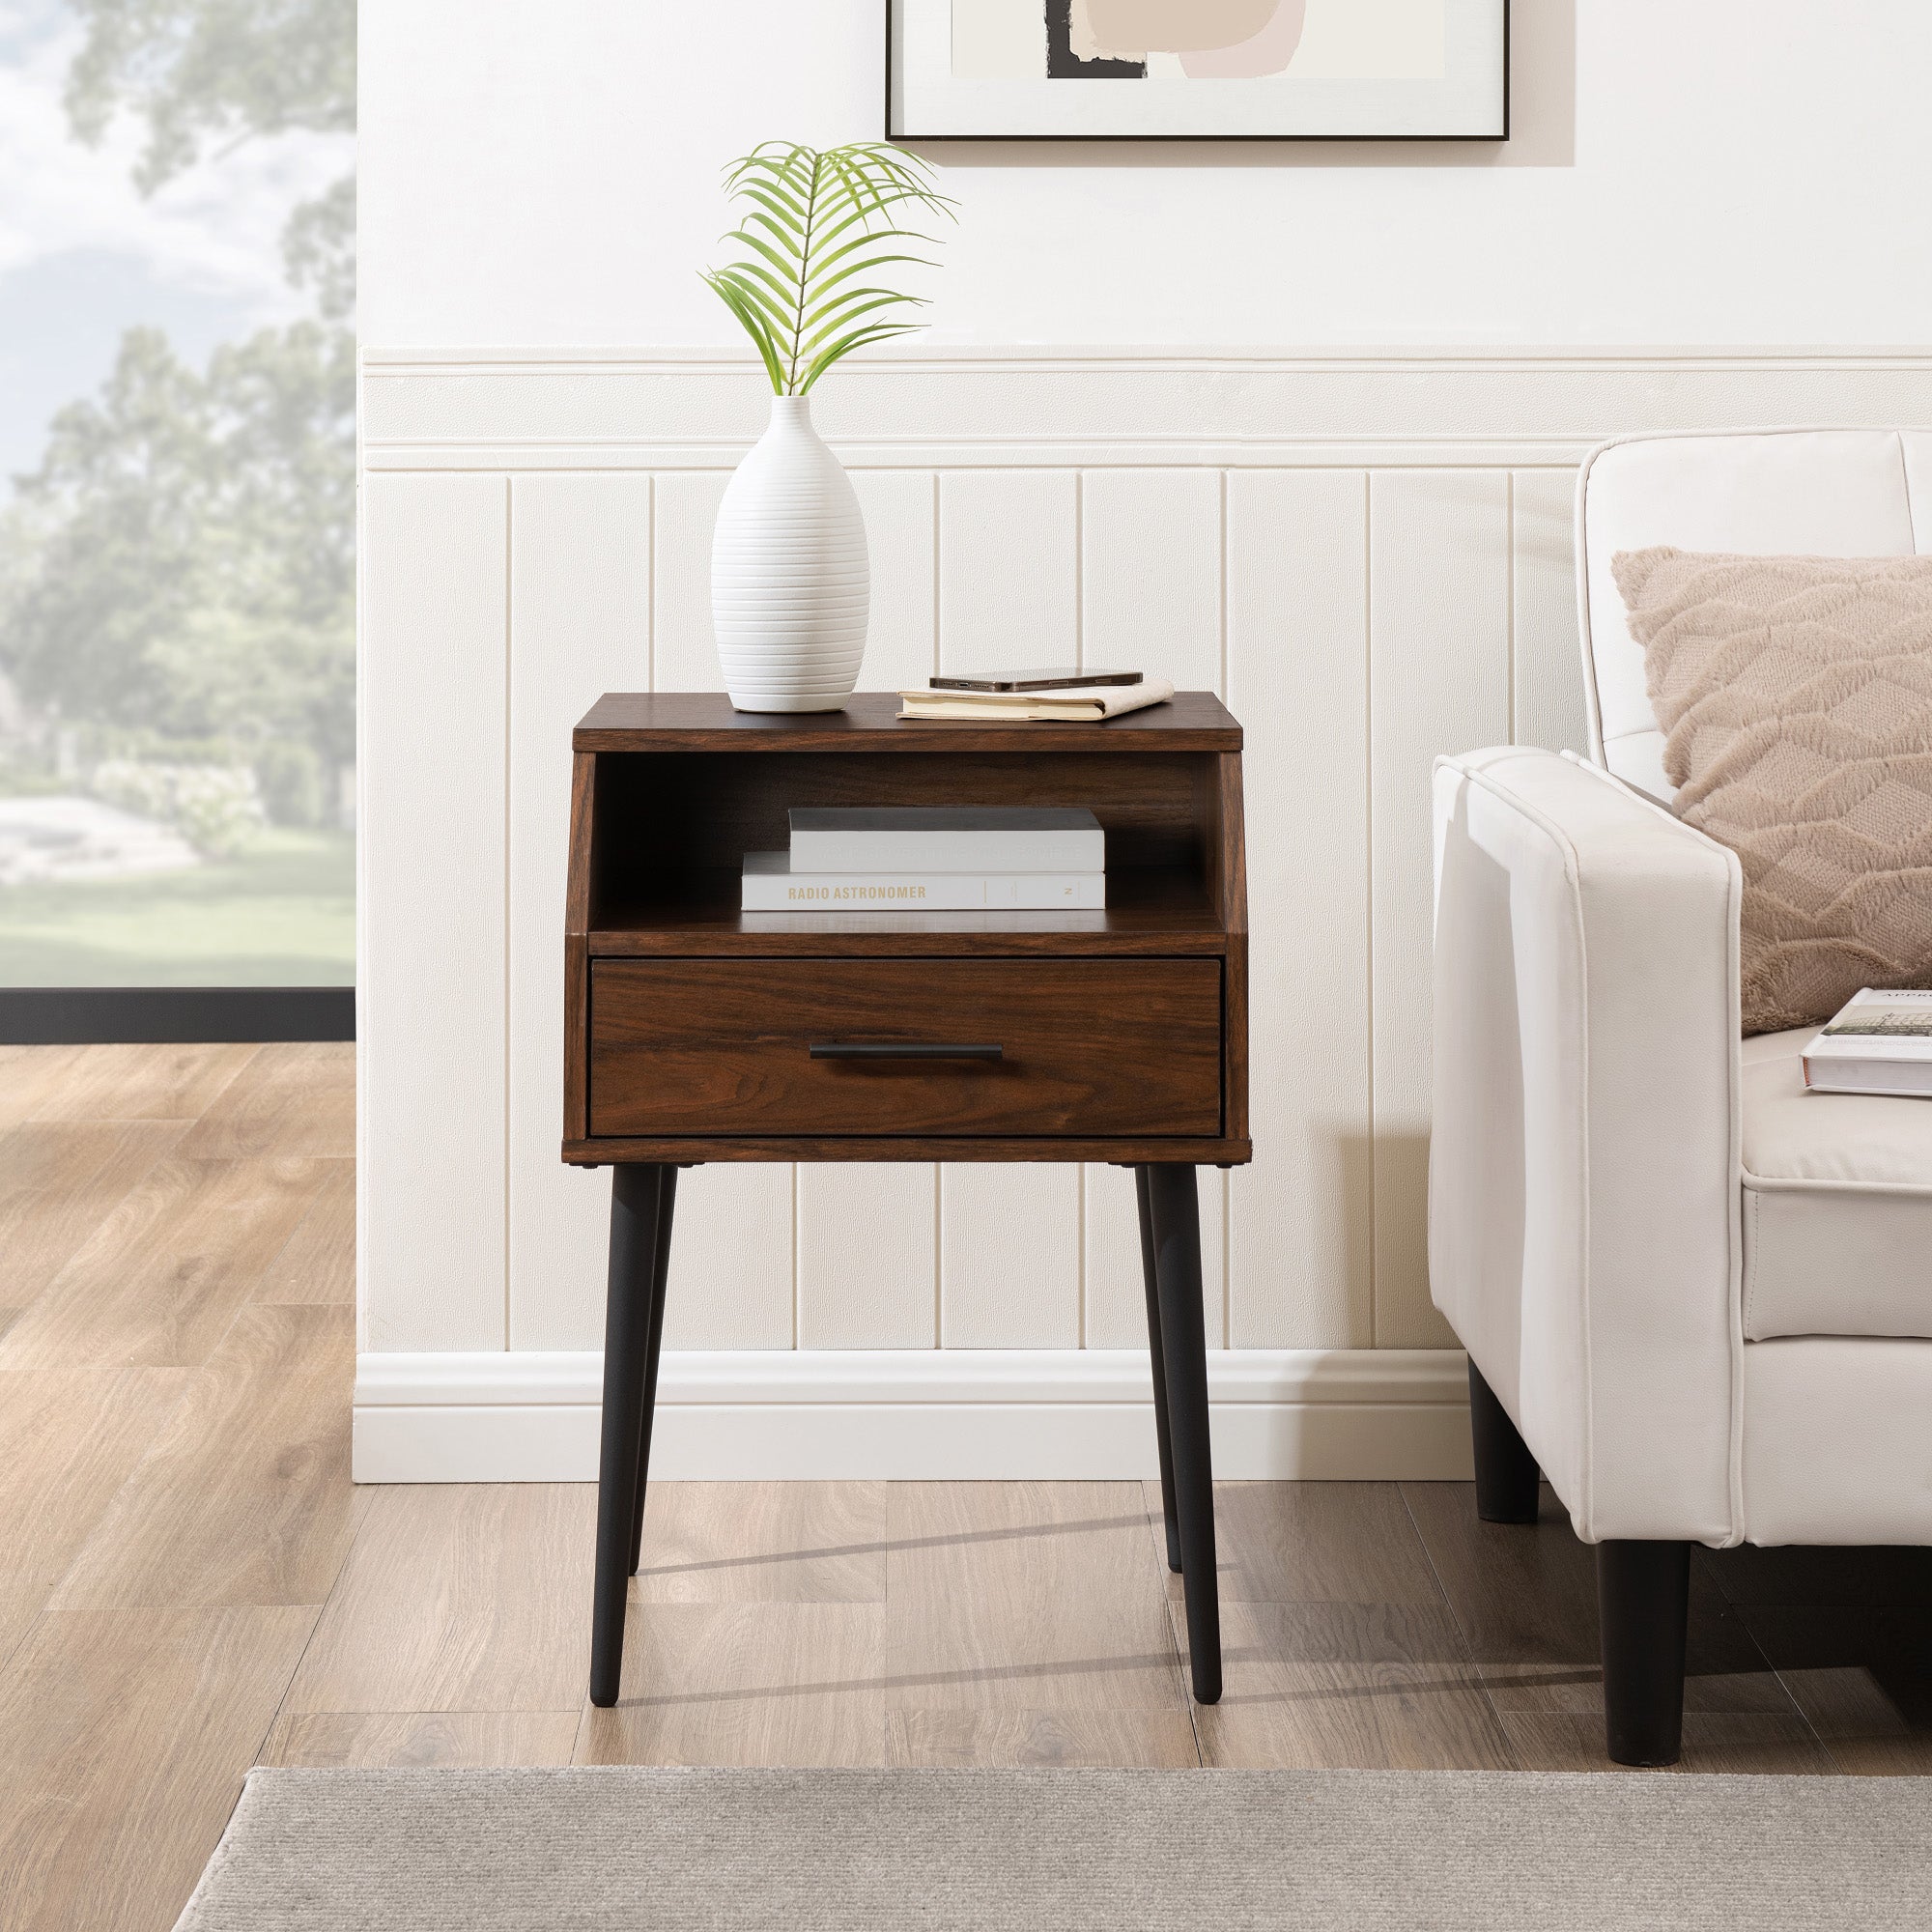 18" 1-Drawer Contemporary Side Table with Open Storage